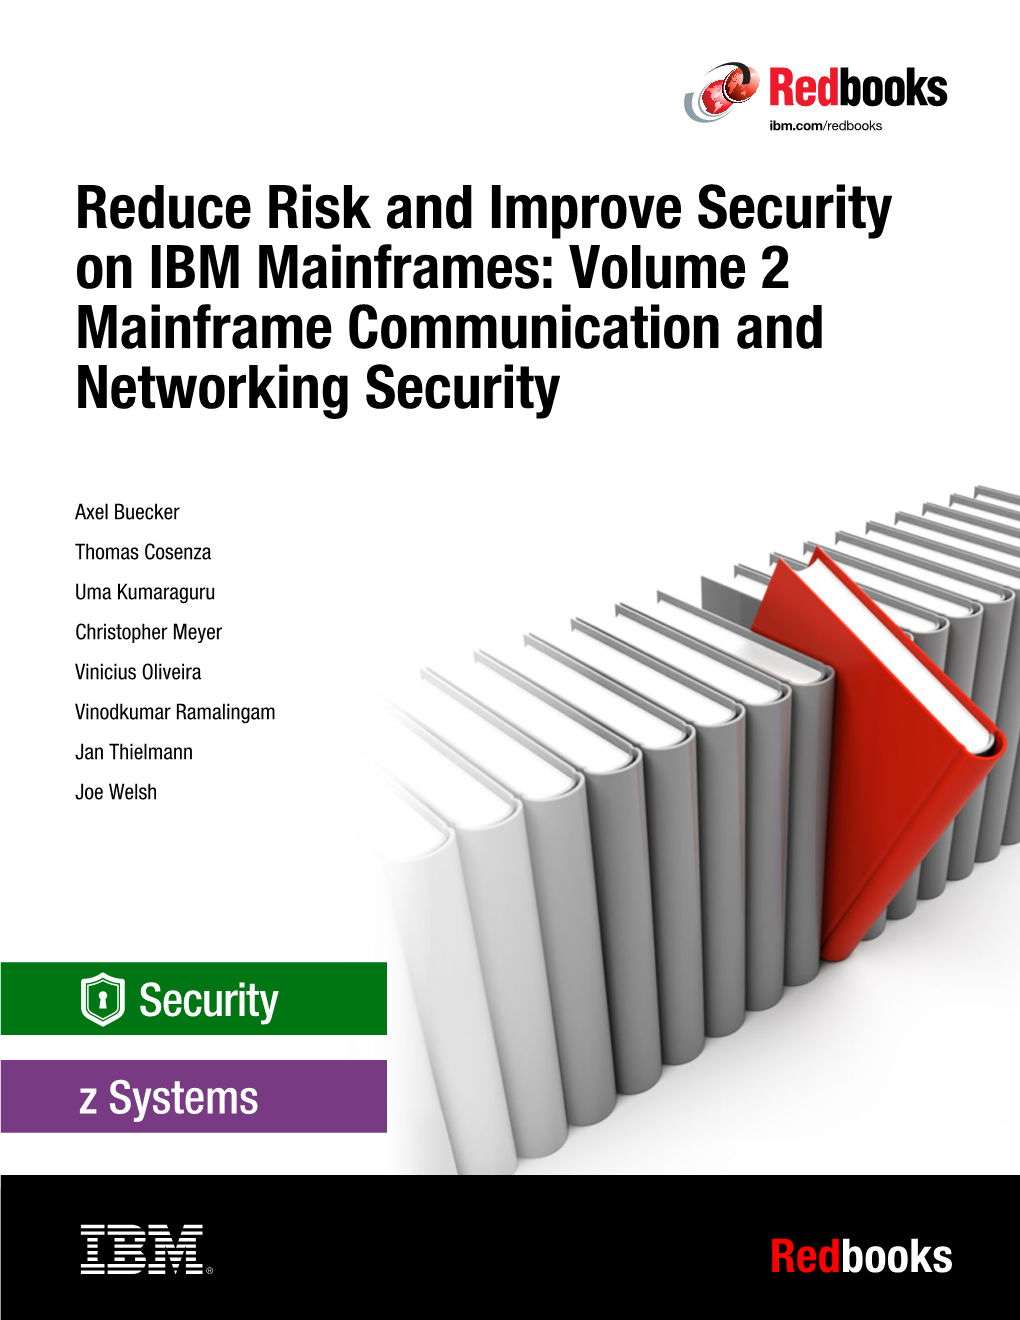 Volume 2 Mainframe Communication and Networking Security